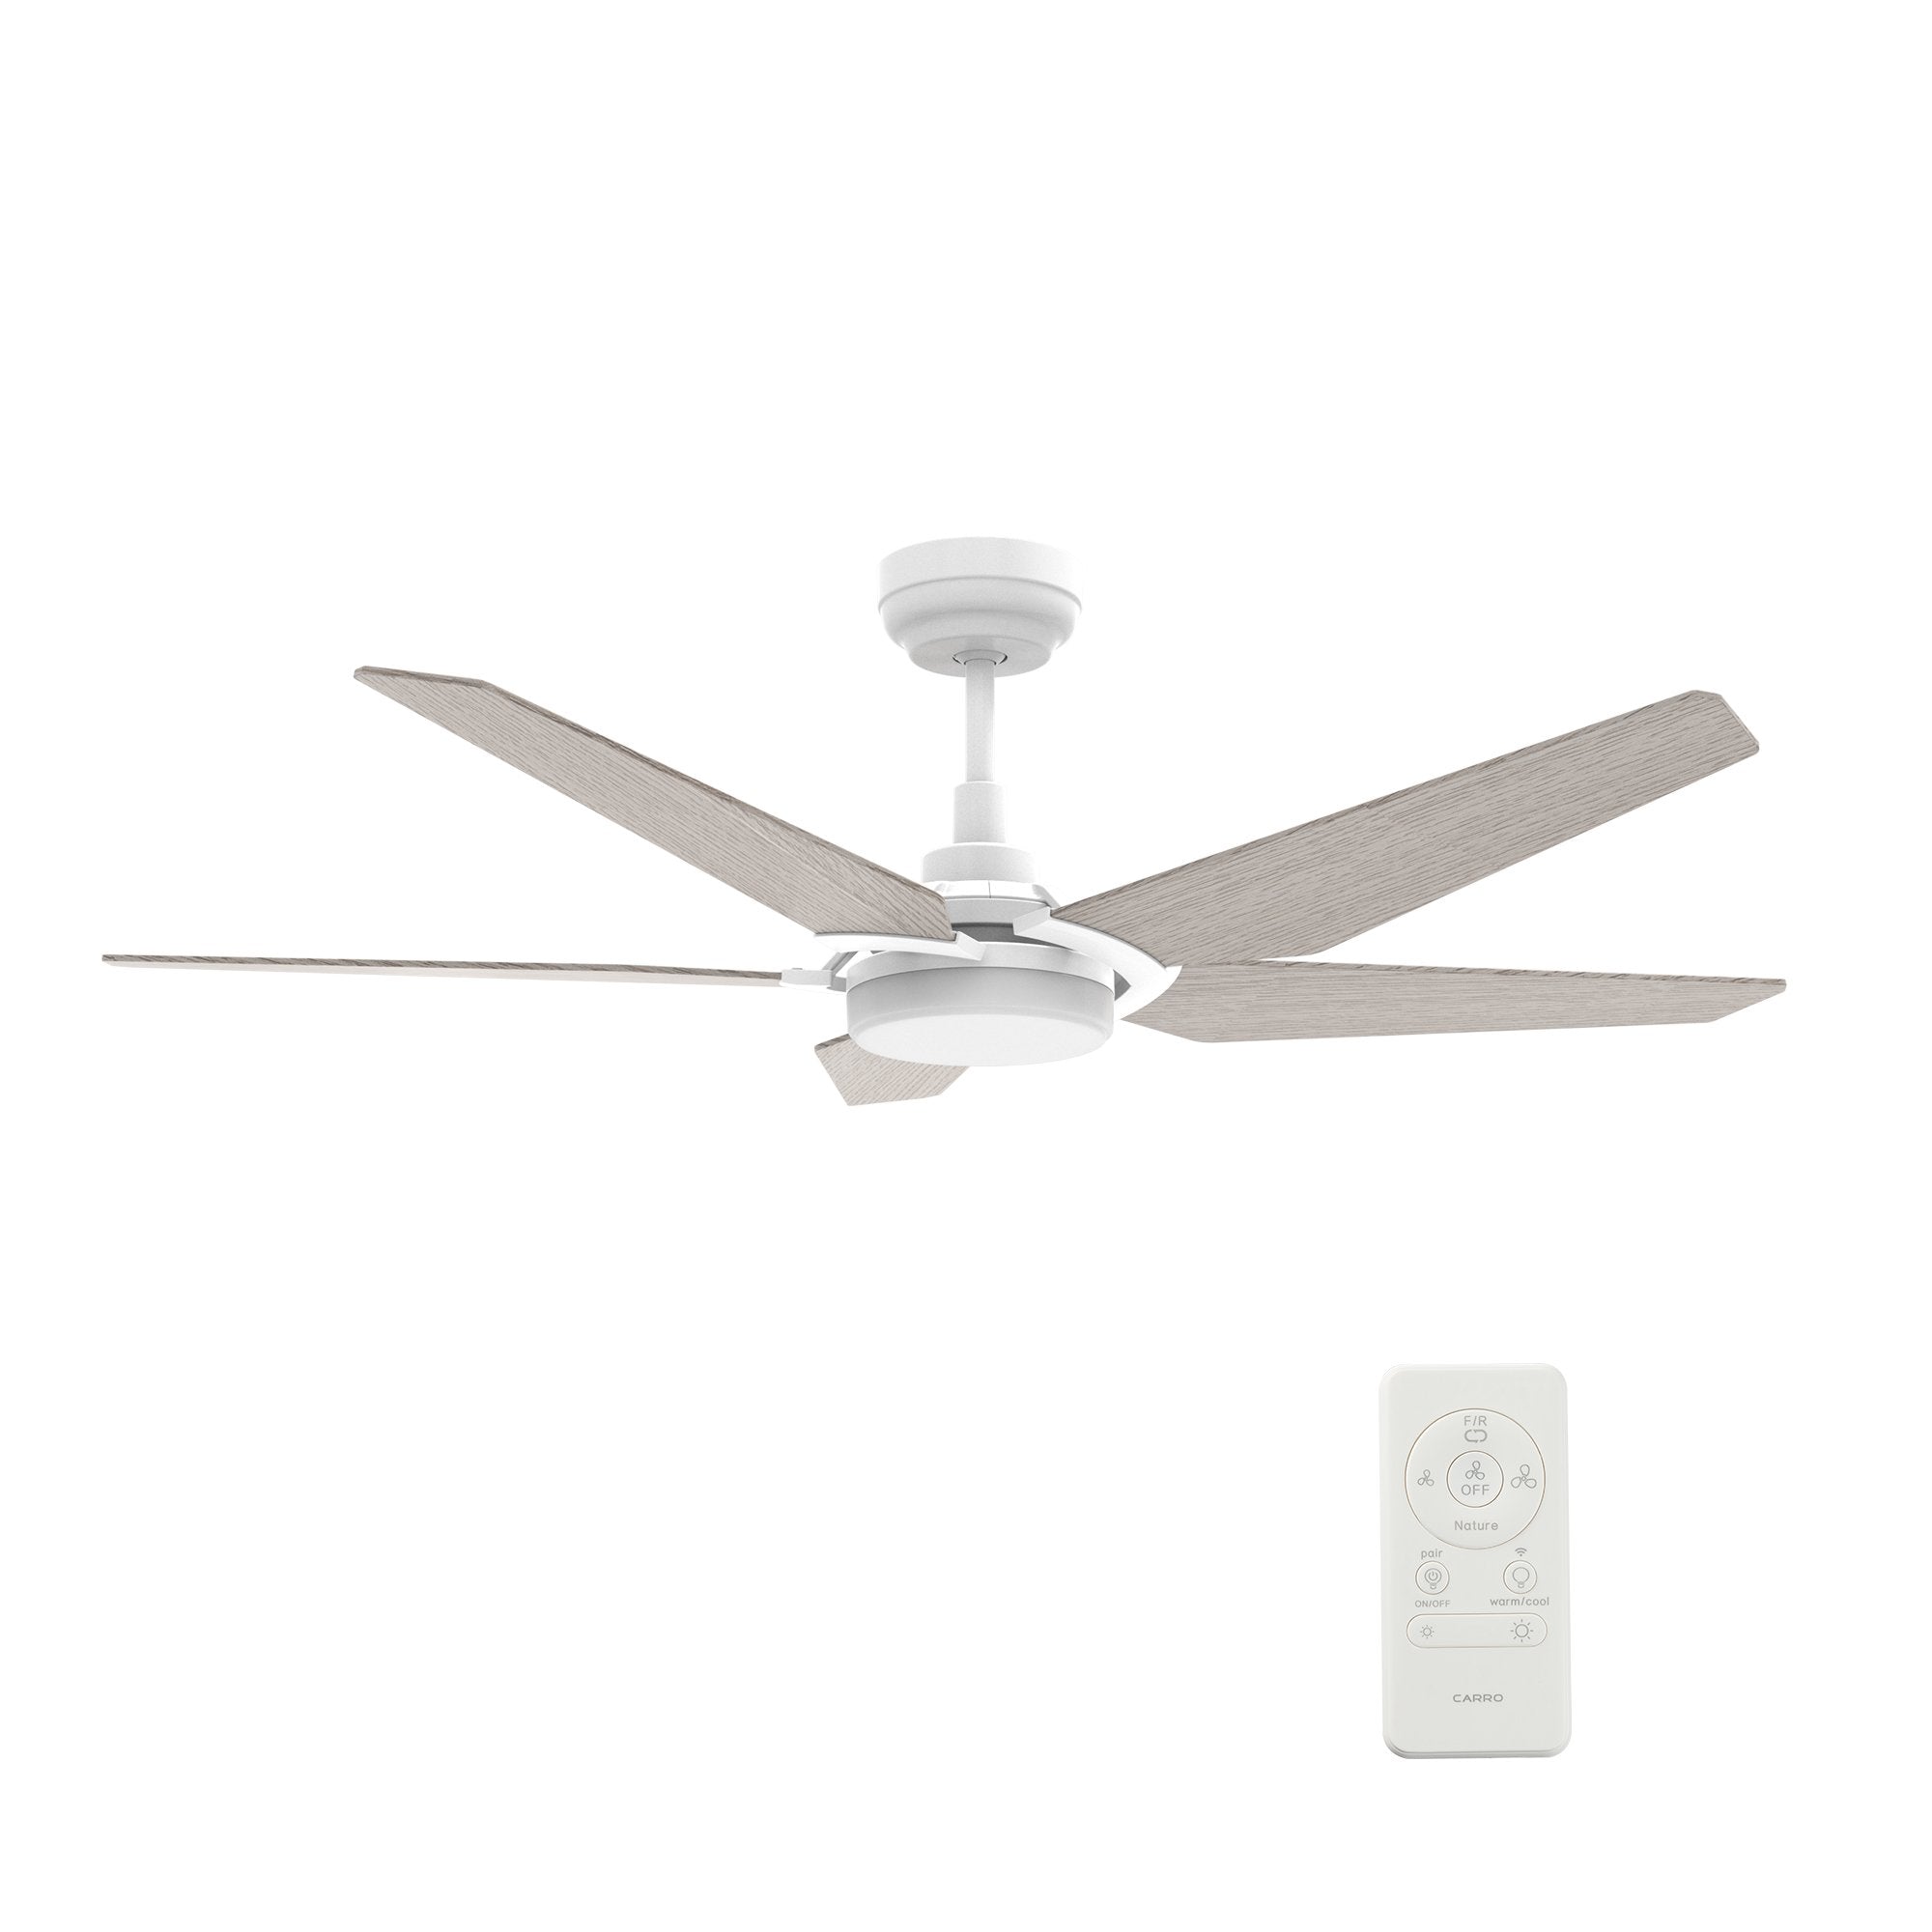 Voyager 52'' Best Smart Ceiling Fan with Remote, Light Kit Included, Works with Google Assistant and Amazon Alexa